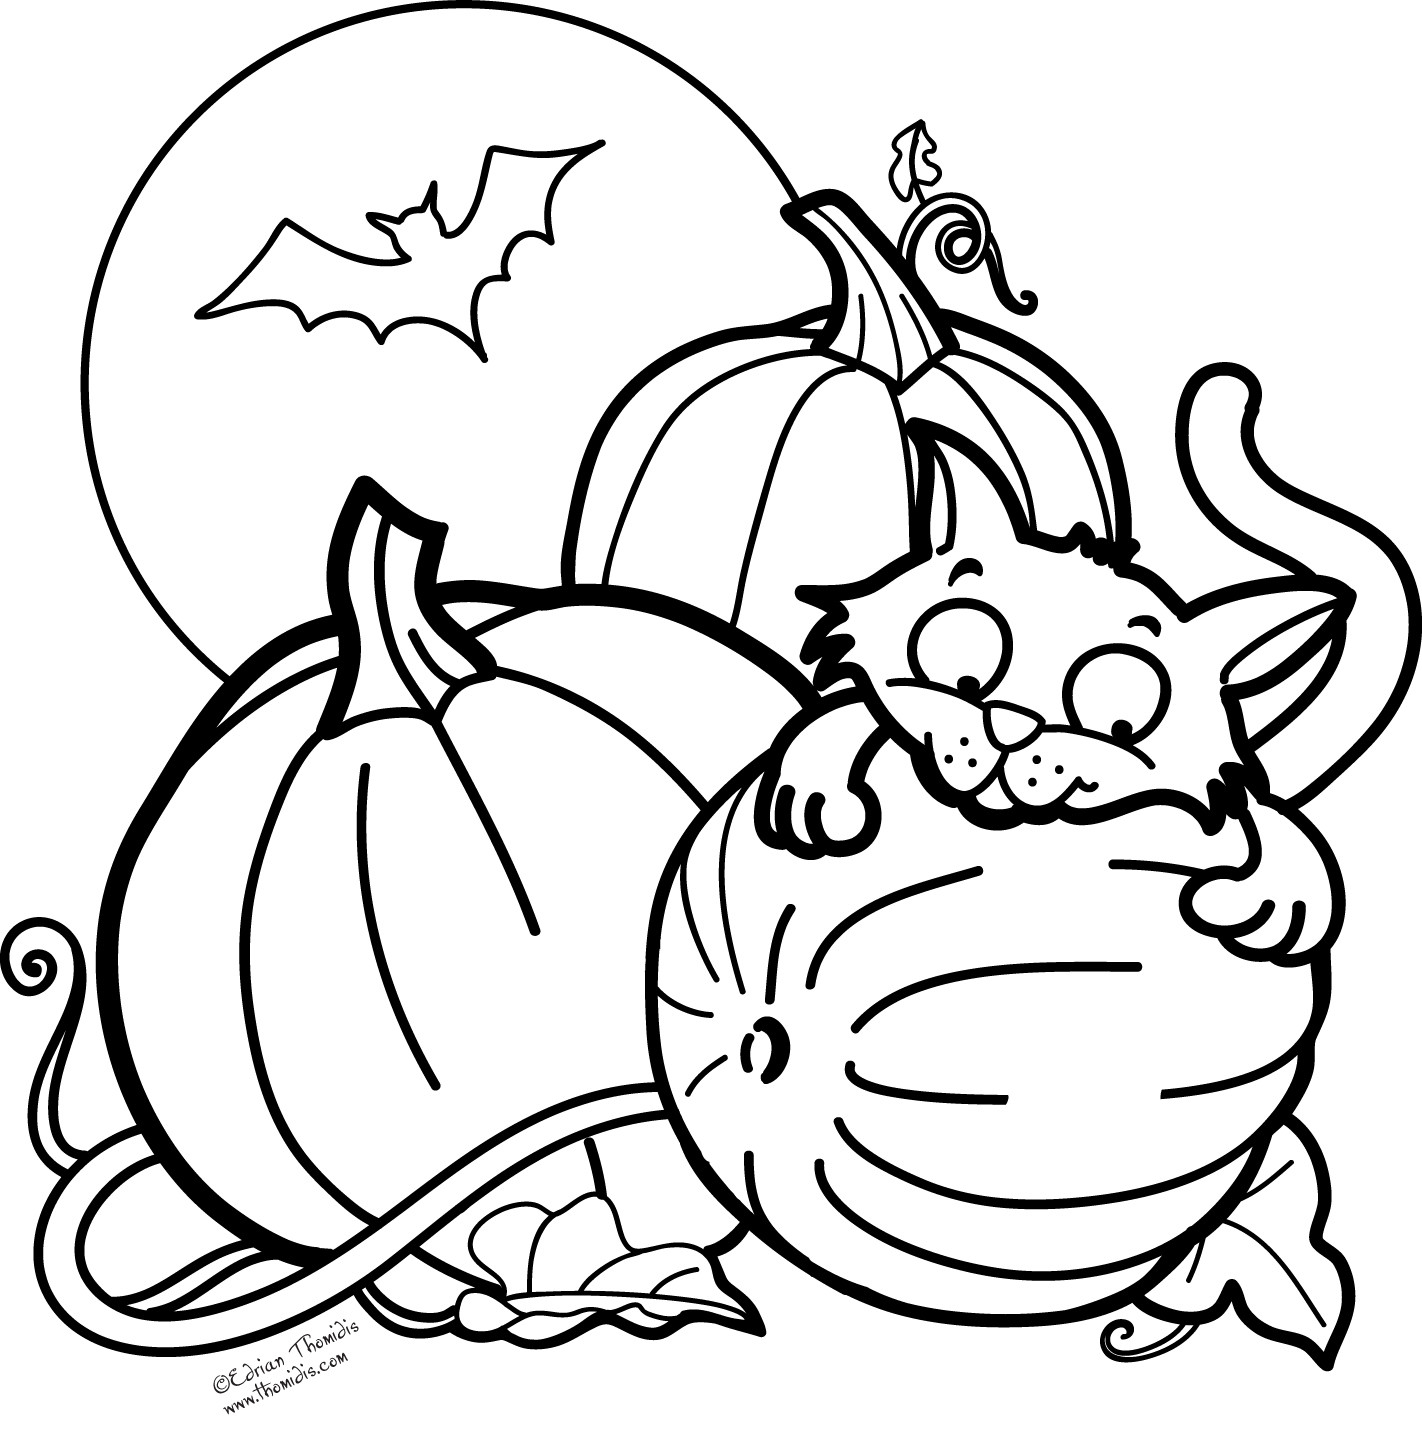 Printable Coloring Pages Halloween
 A picture paints a thousand words Pumpkin Cat and a Bat